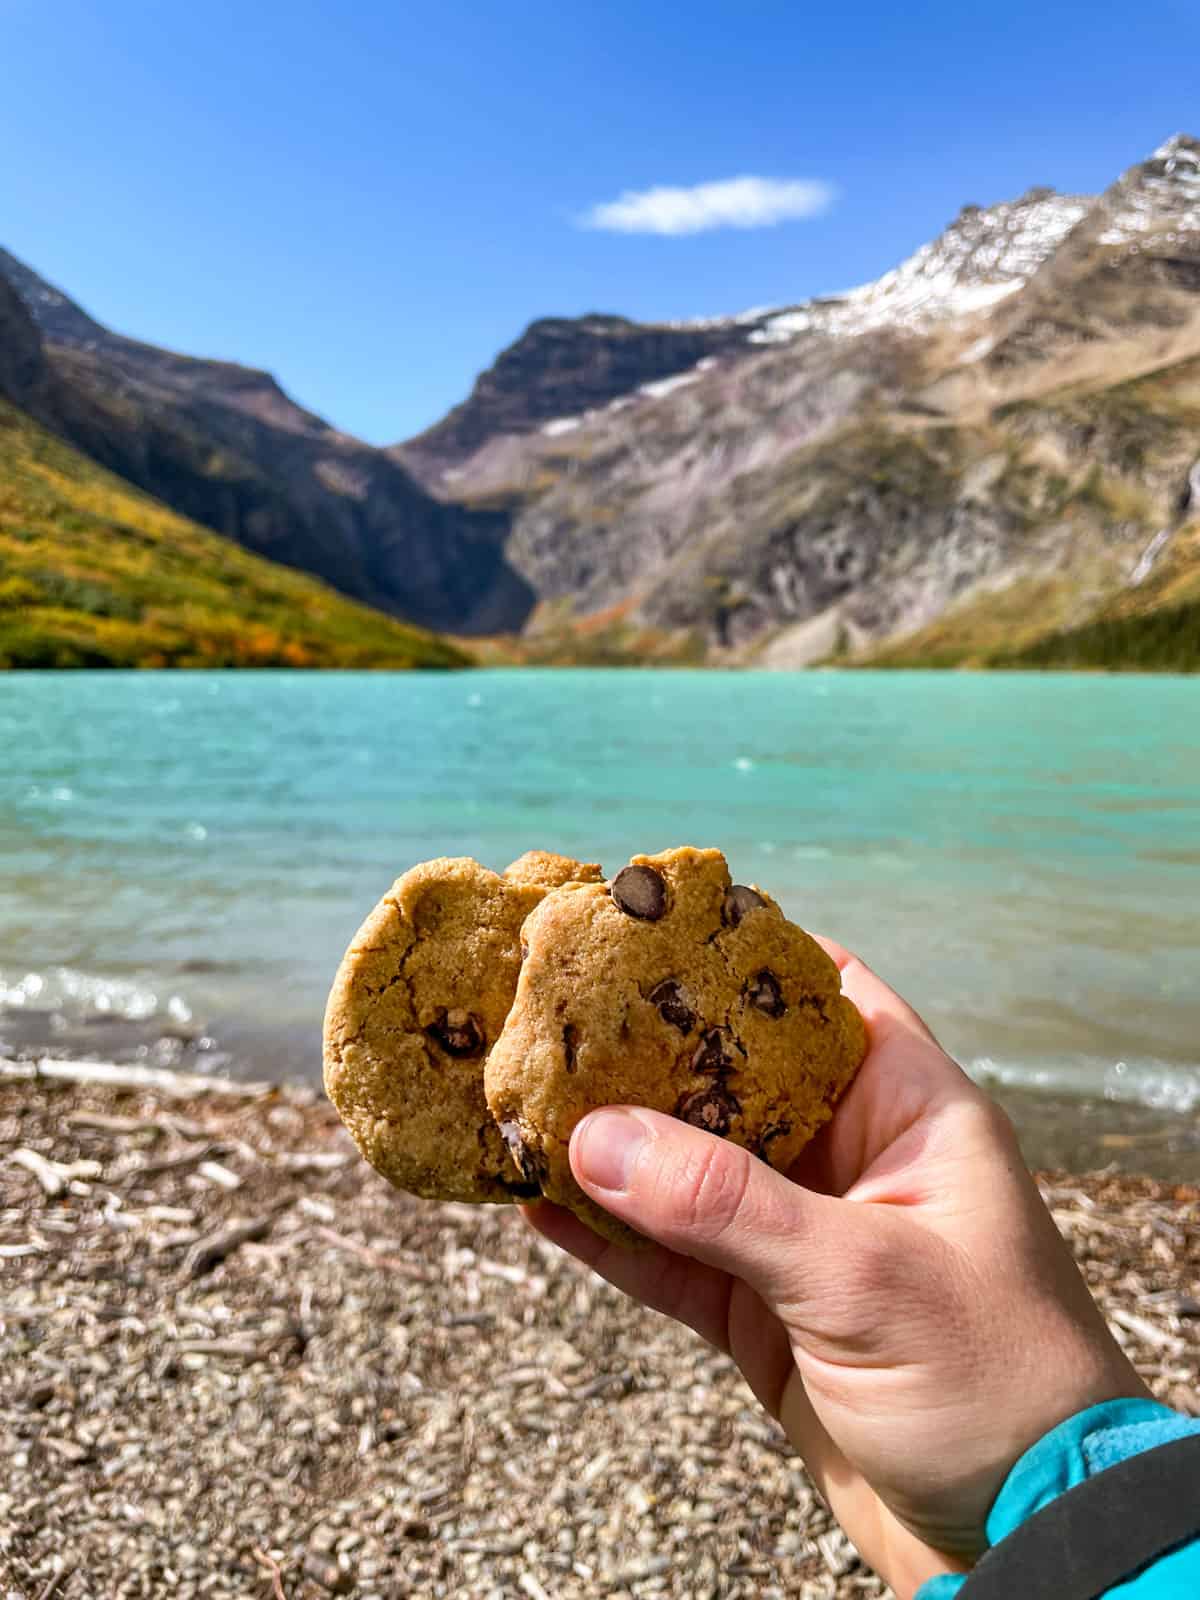 Two chocolate chip cookies held in a hand with the turquoise lake and mountains in the background.